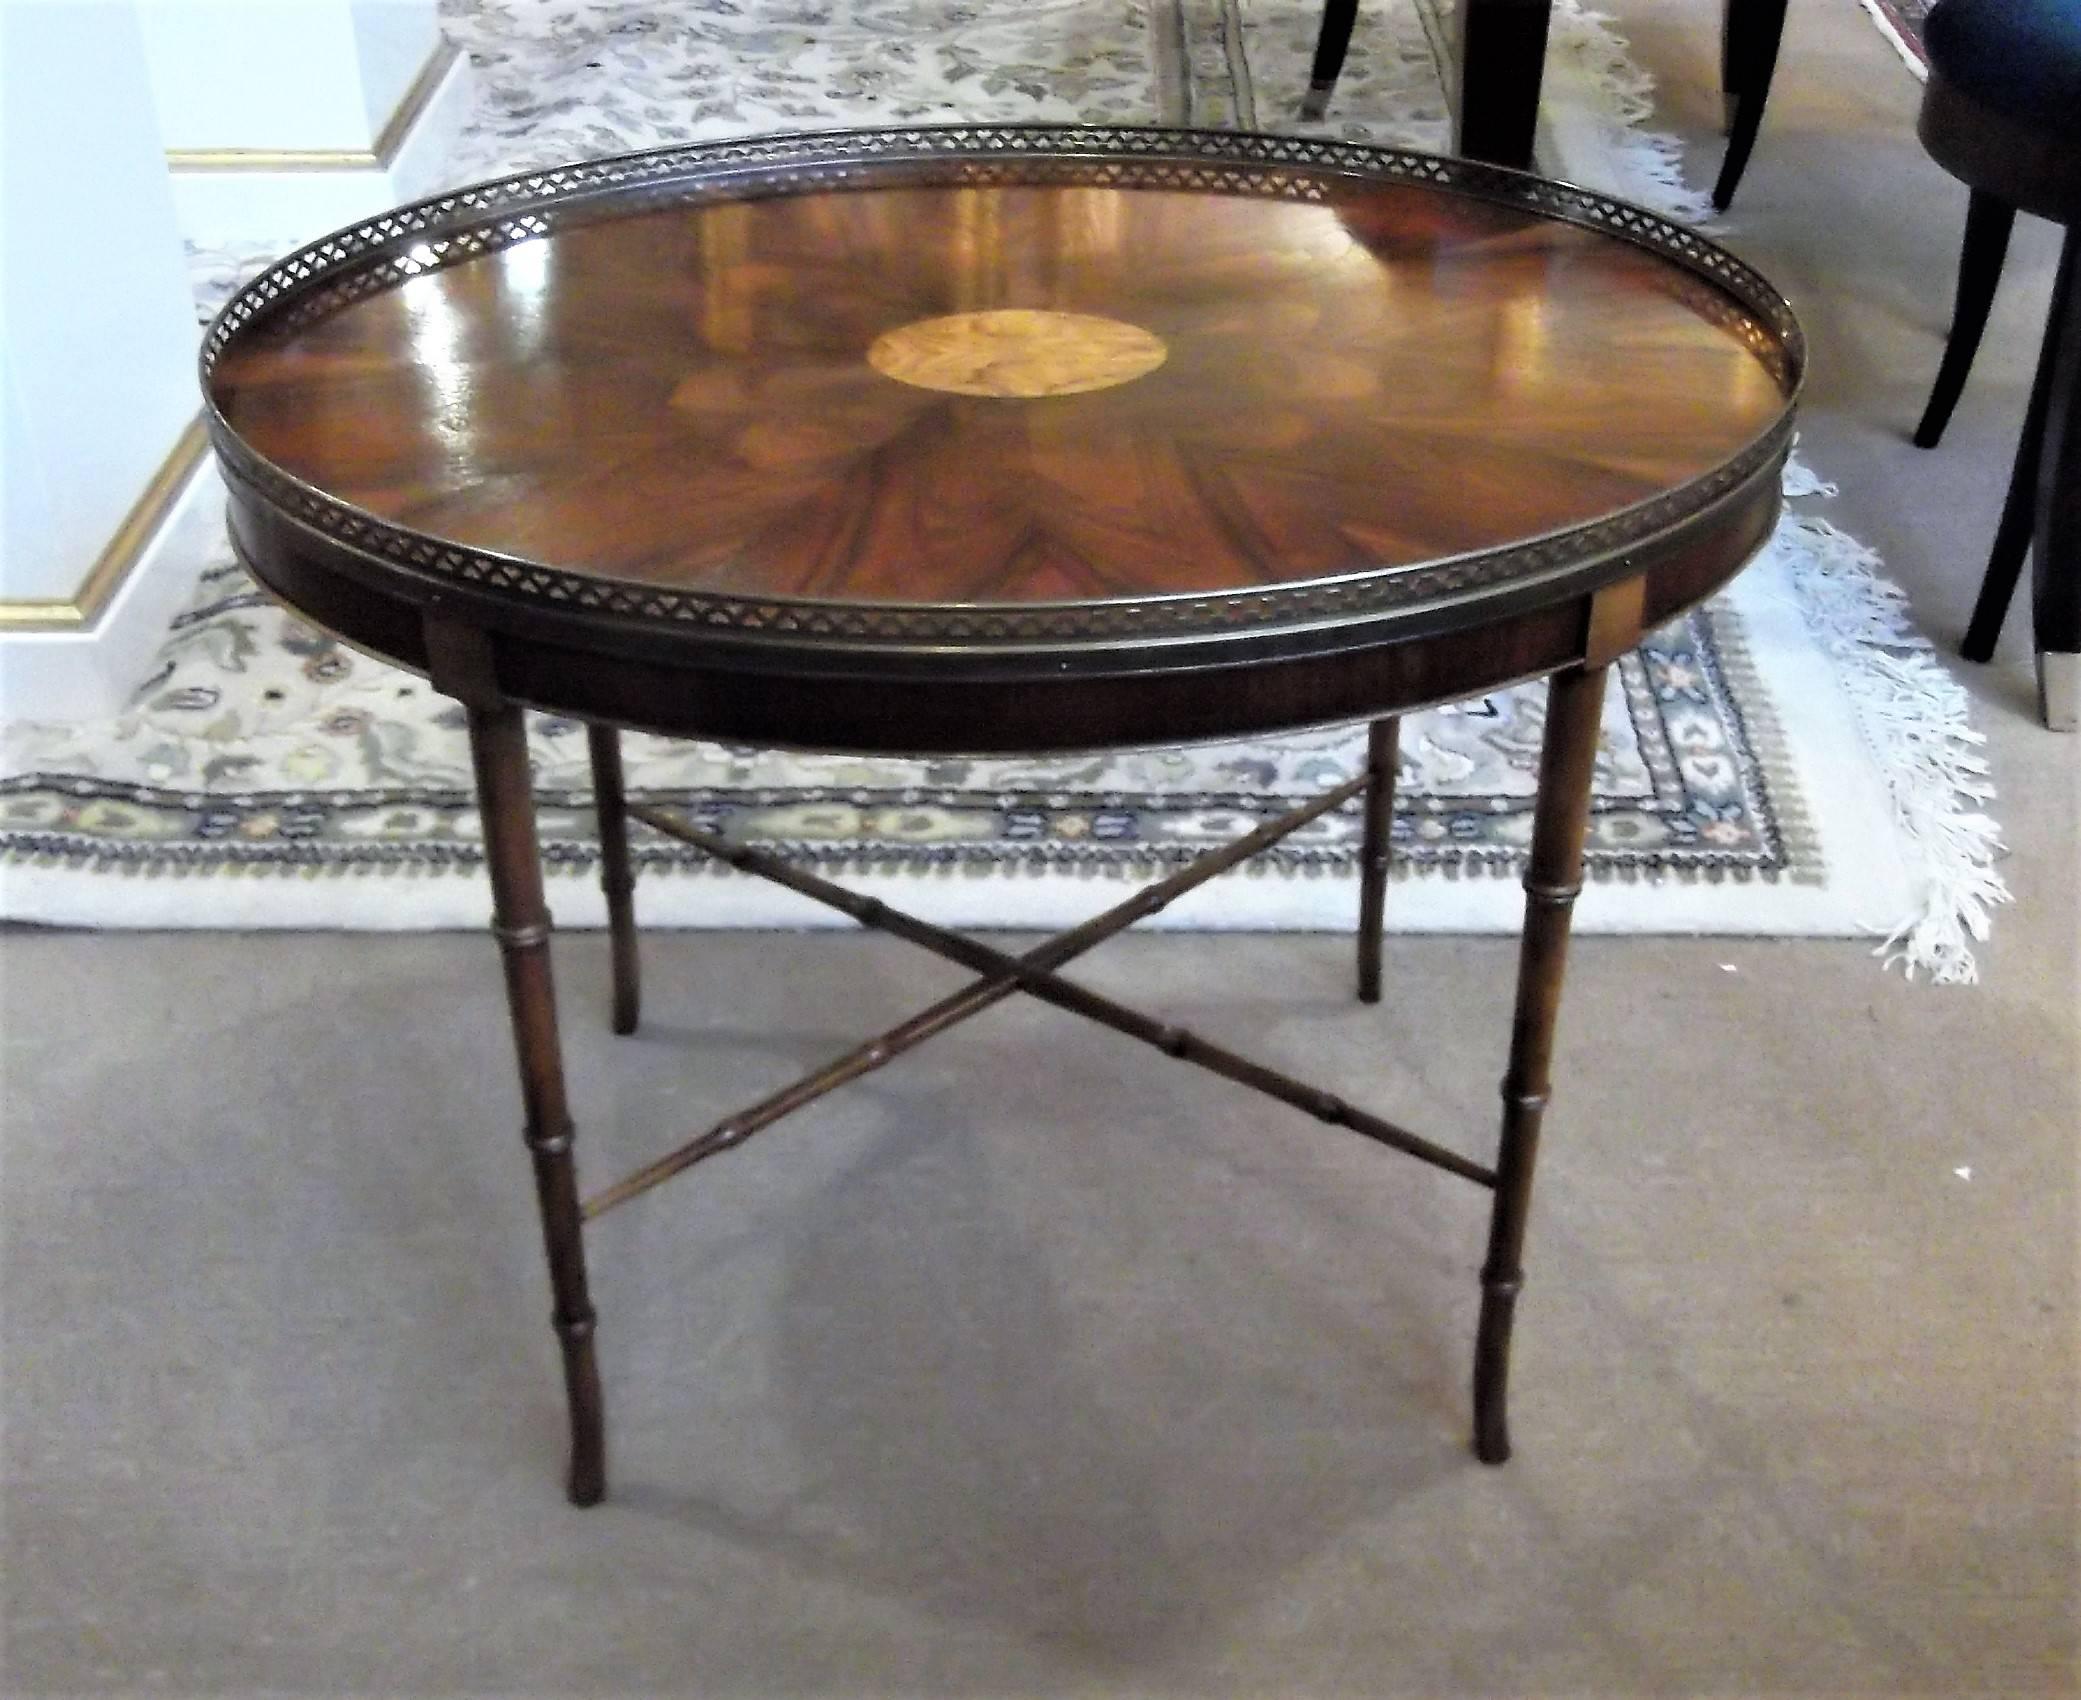 Beautiful flame mahogany Regency style brass gallery edge table. The top is beautifully finished in a matched wood pattern with a center inlaid medallion. The table is a slightly higher than a typical coffee table following the traditional height of